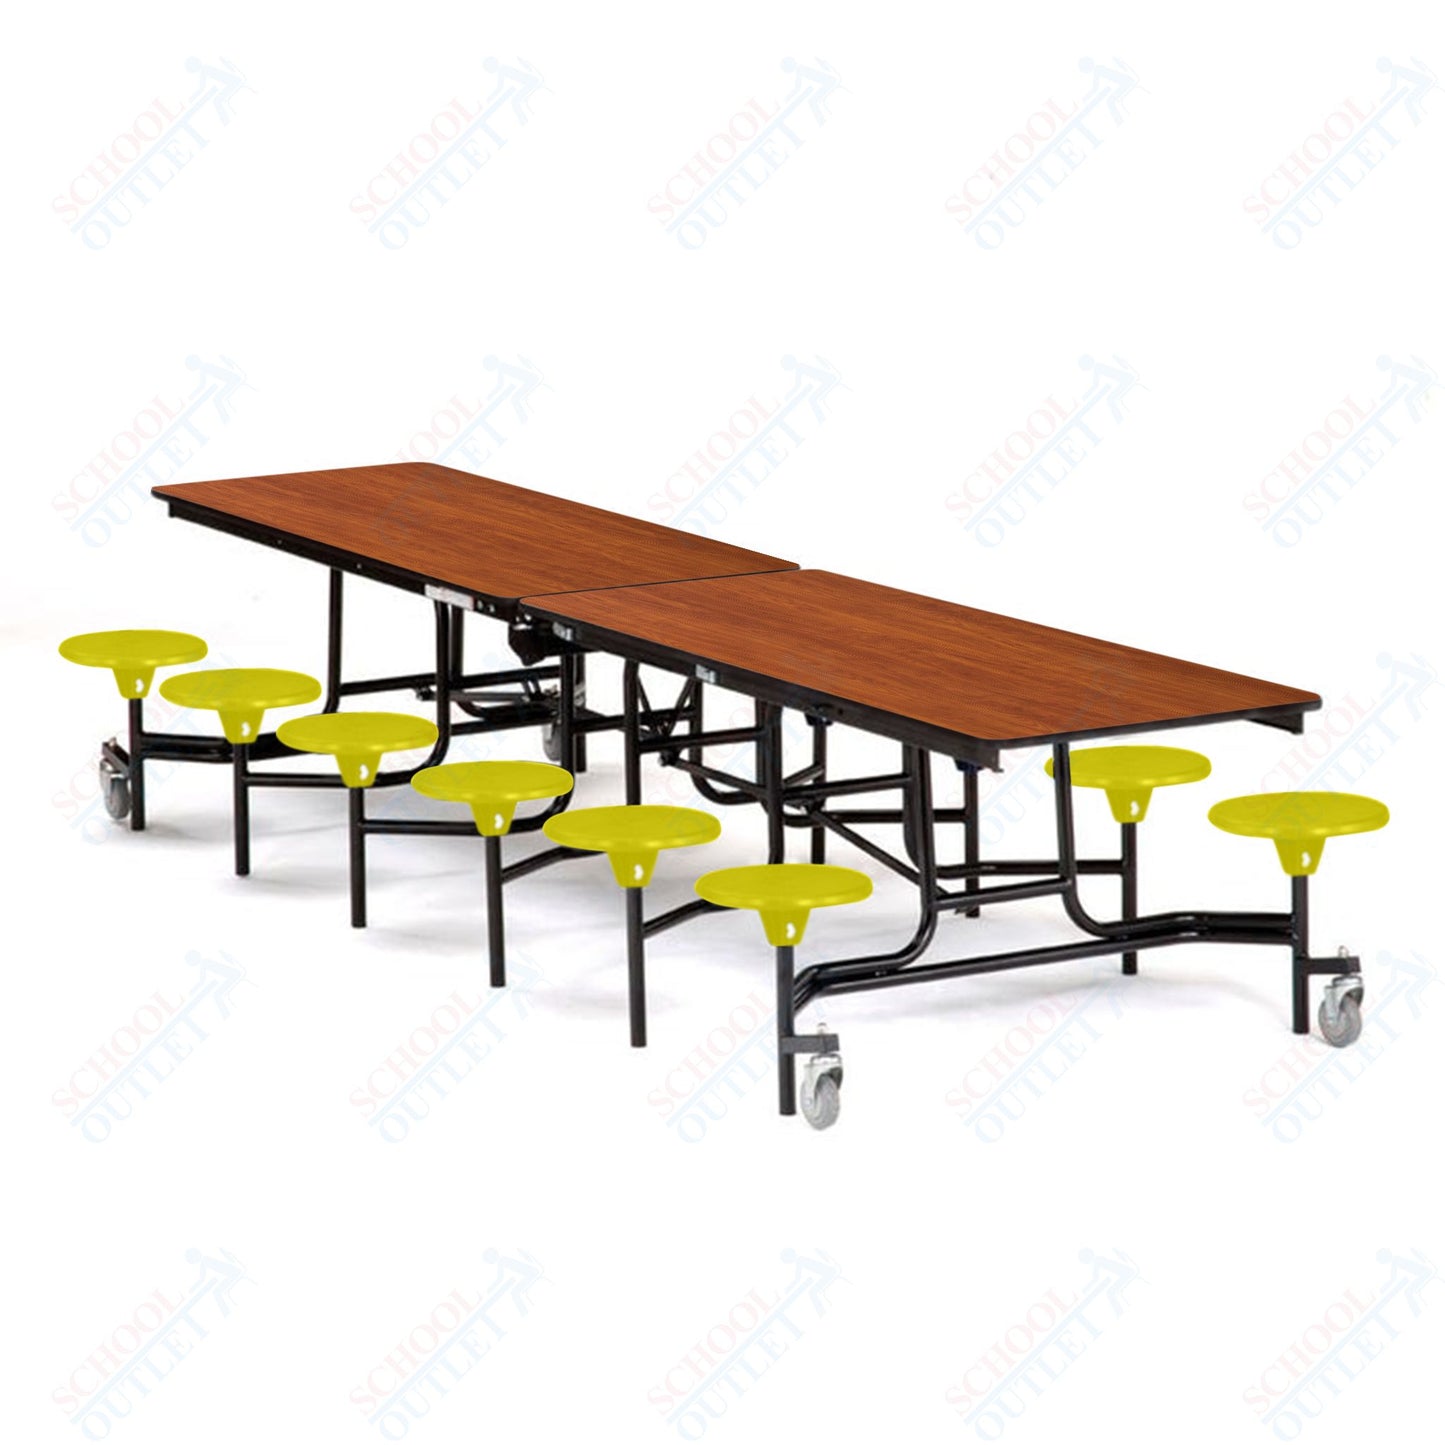 Mobile Cafeteria Lunchroom Stool Table - 30" W x 12' L - 12 Stools - Plywood Core - T-Molding Edge - Chrome Frame